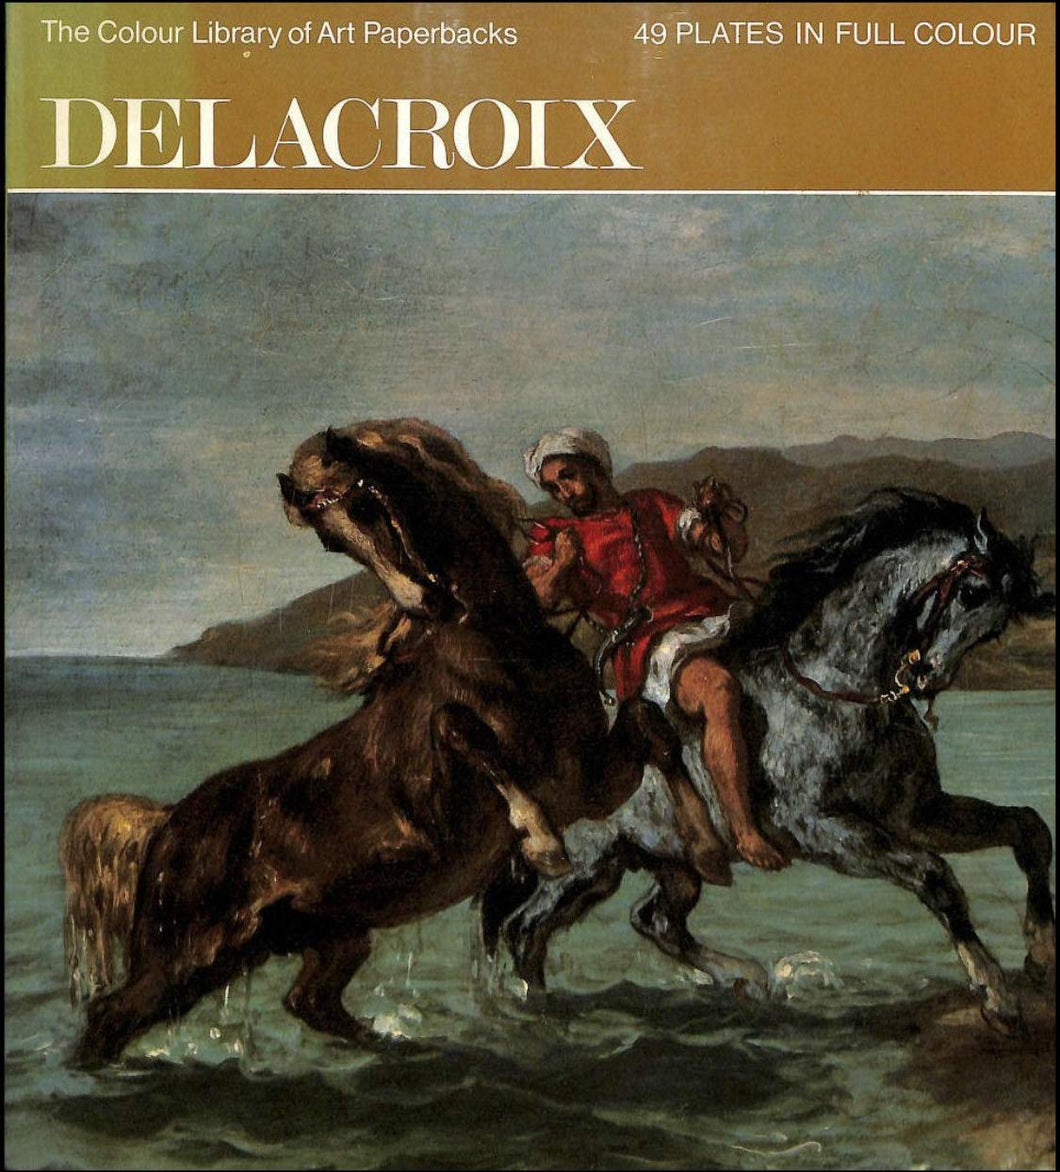 The Colour Library Of Art; Delacroix, 49 Plates In Full Colour [Hardcover] Phoebe Pool